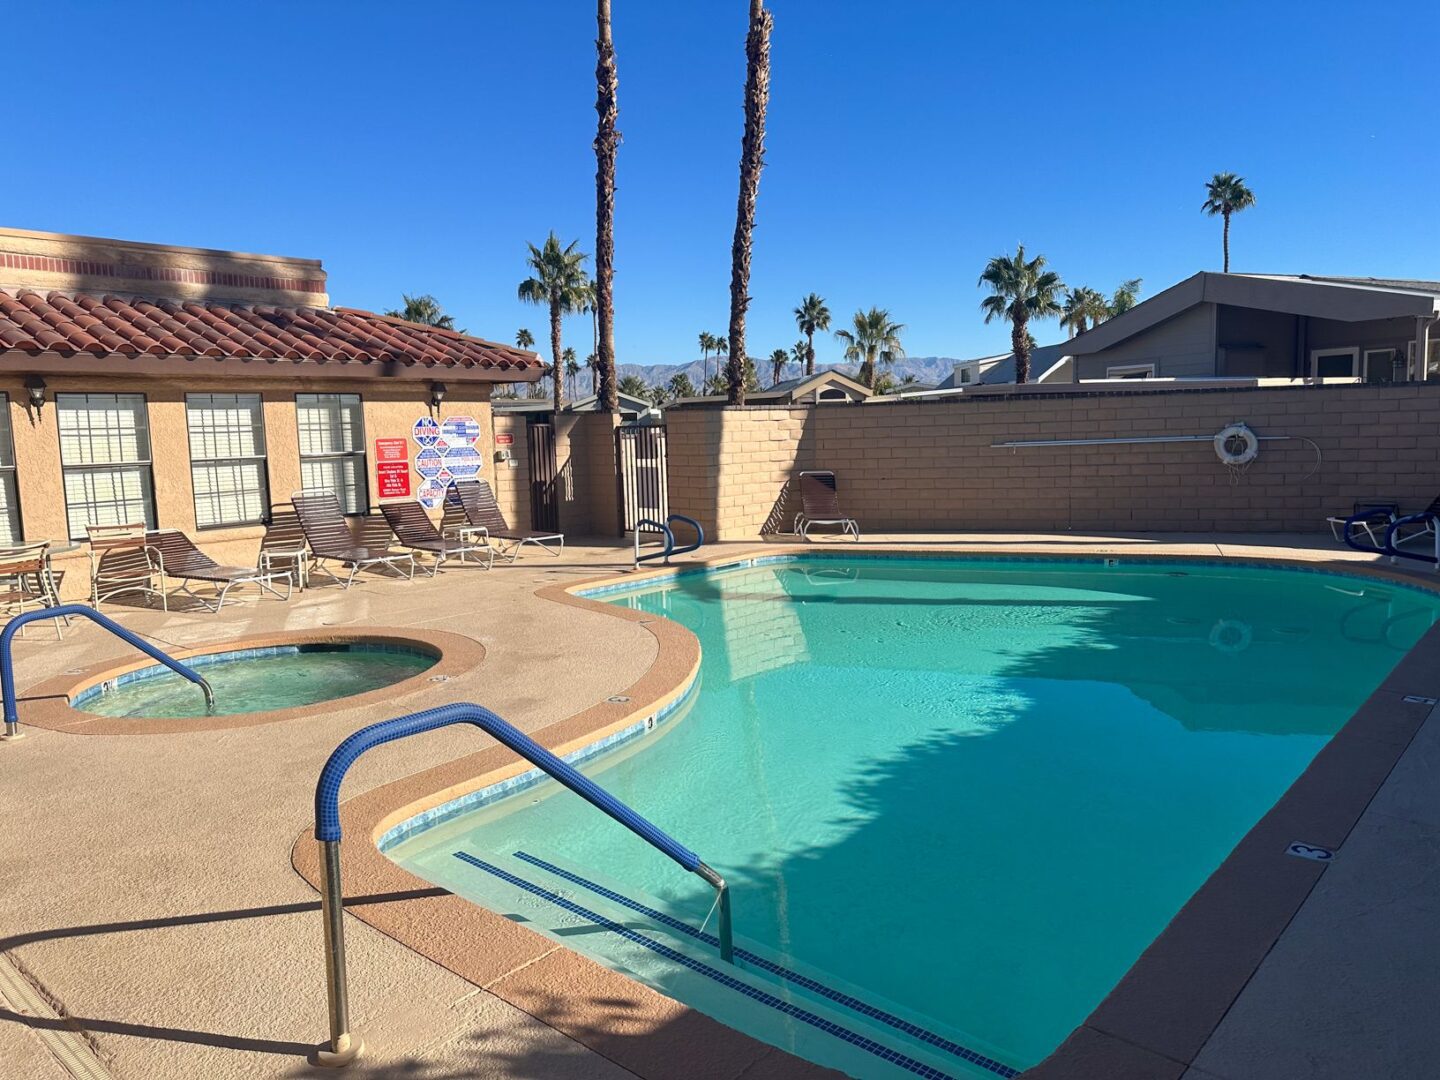 A swimming pool at an apartment complex in palm springs.